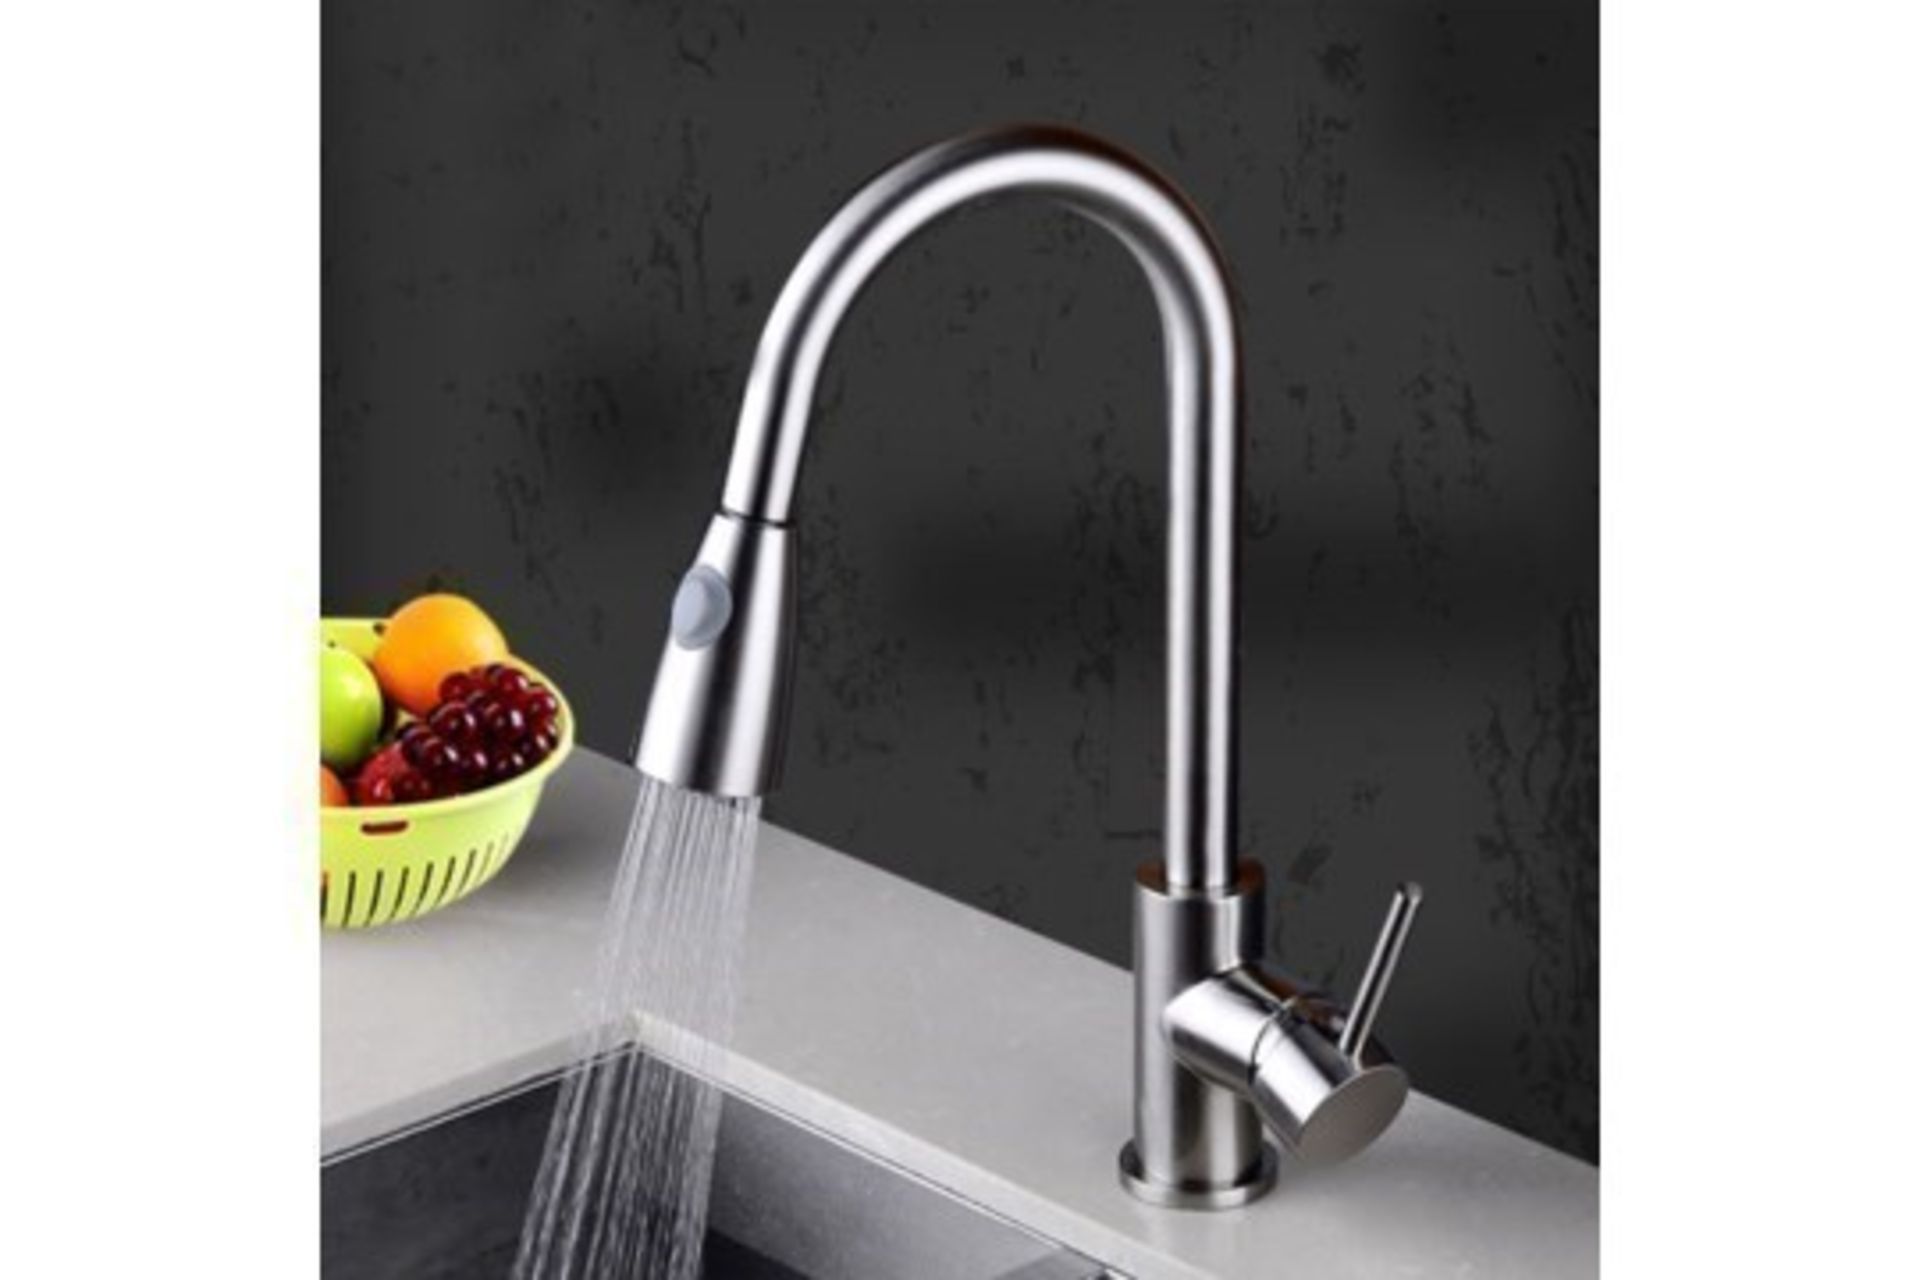 New & Boxed Della Modern Monobloc Chrome Brass Pull Out Spray Mixer Tap. RRP £299.99.This Tap ... - Image 3 of 3